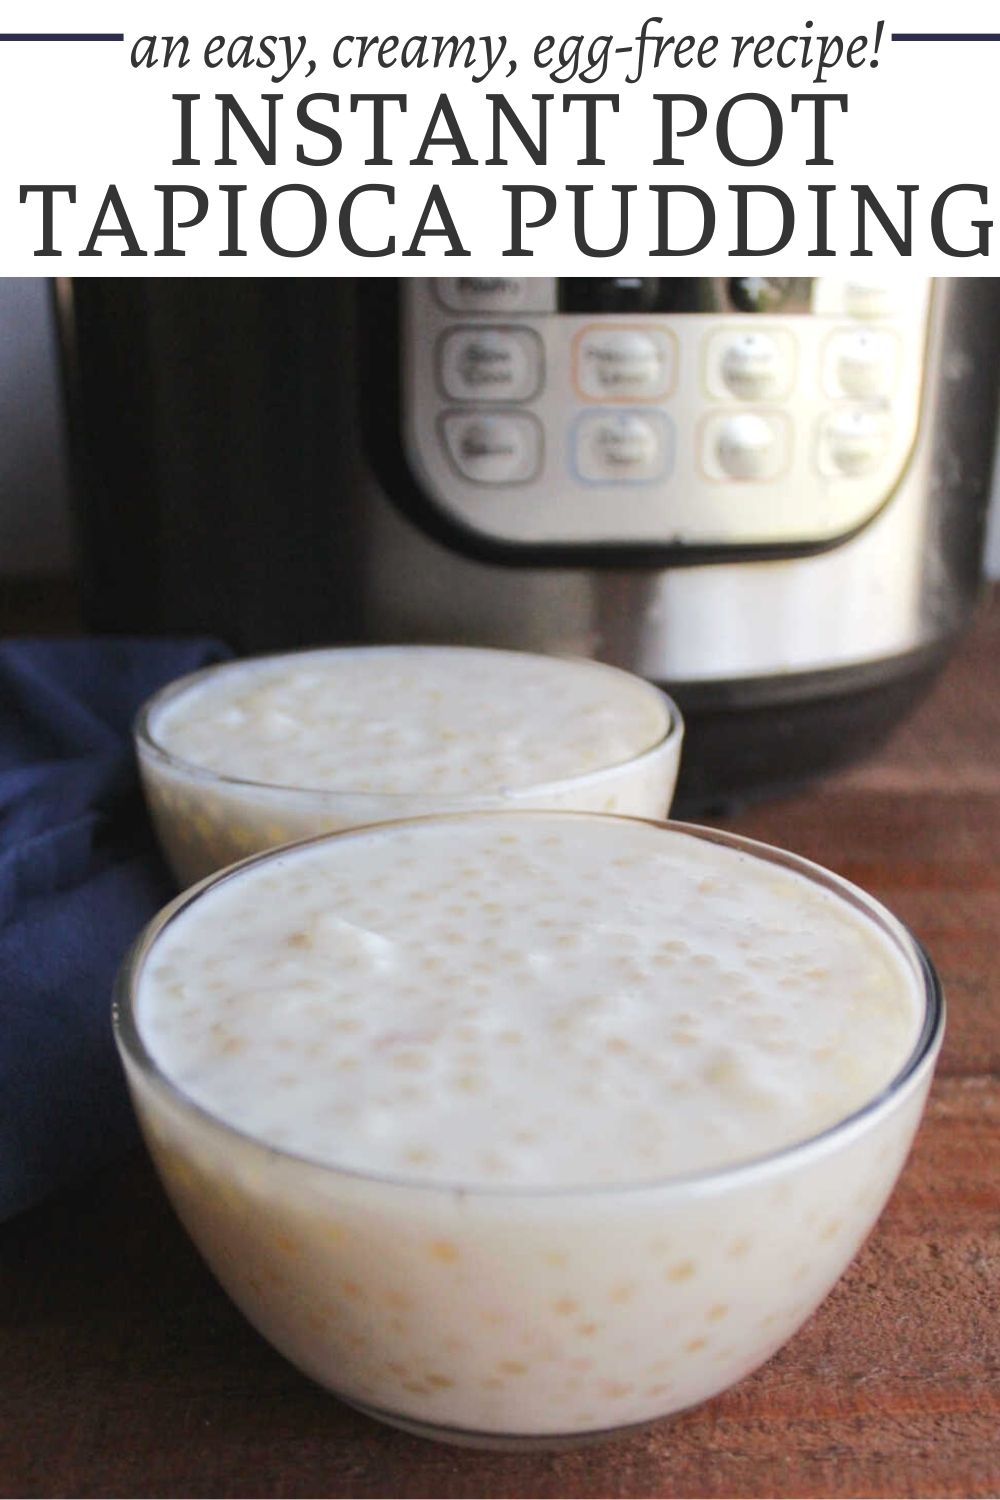 There is something about a creamy bowl of tapioca pudding. It is easier to make at home than you might think, especially with the help of an Instant Pot. It takes almost no effort and gives you all of the nostalgia you could want from the classic treat.